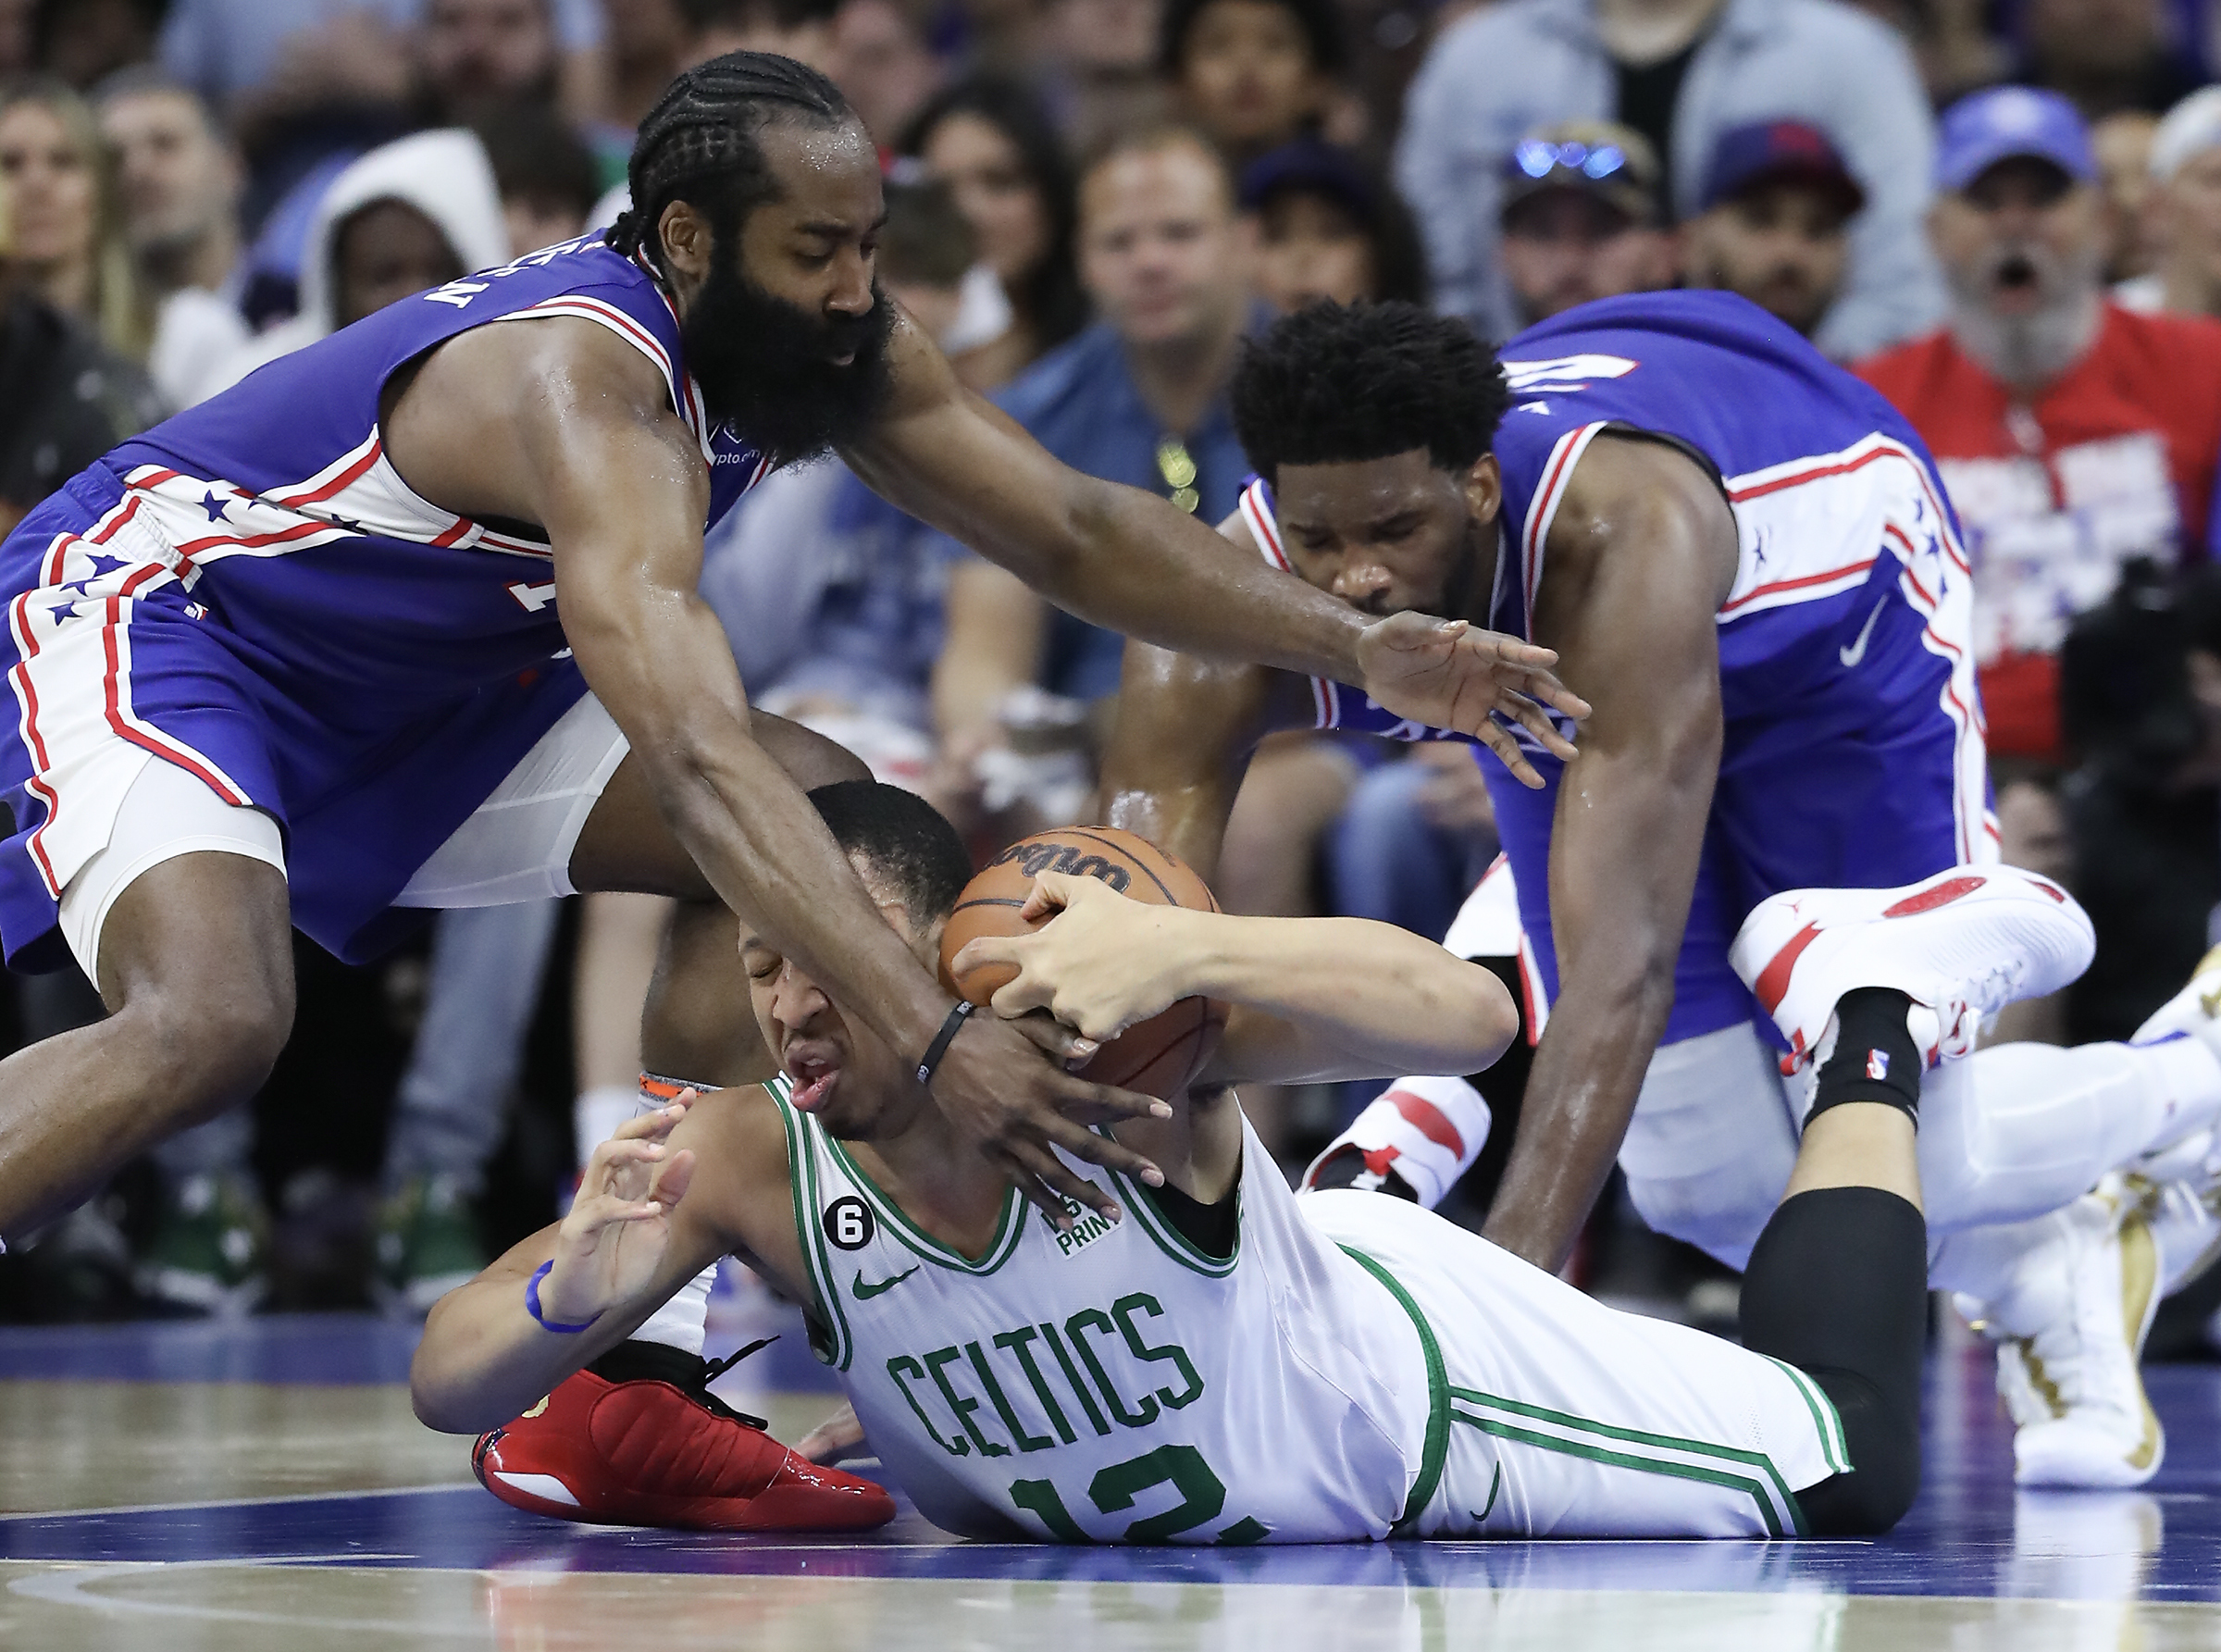 Sixers' defense clamps down in overtime of chaotic 133-122 victory